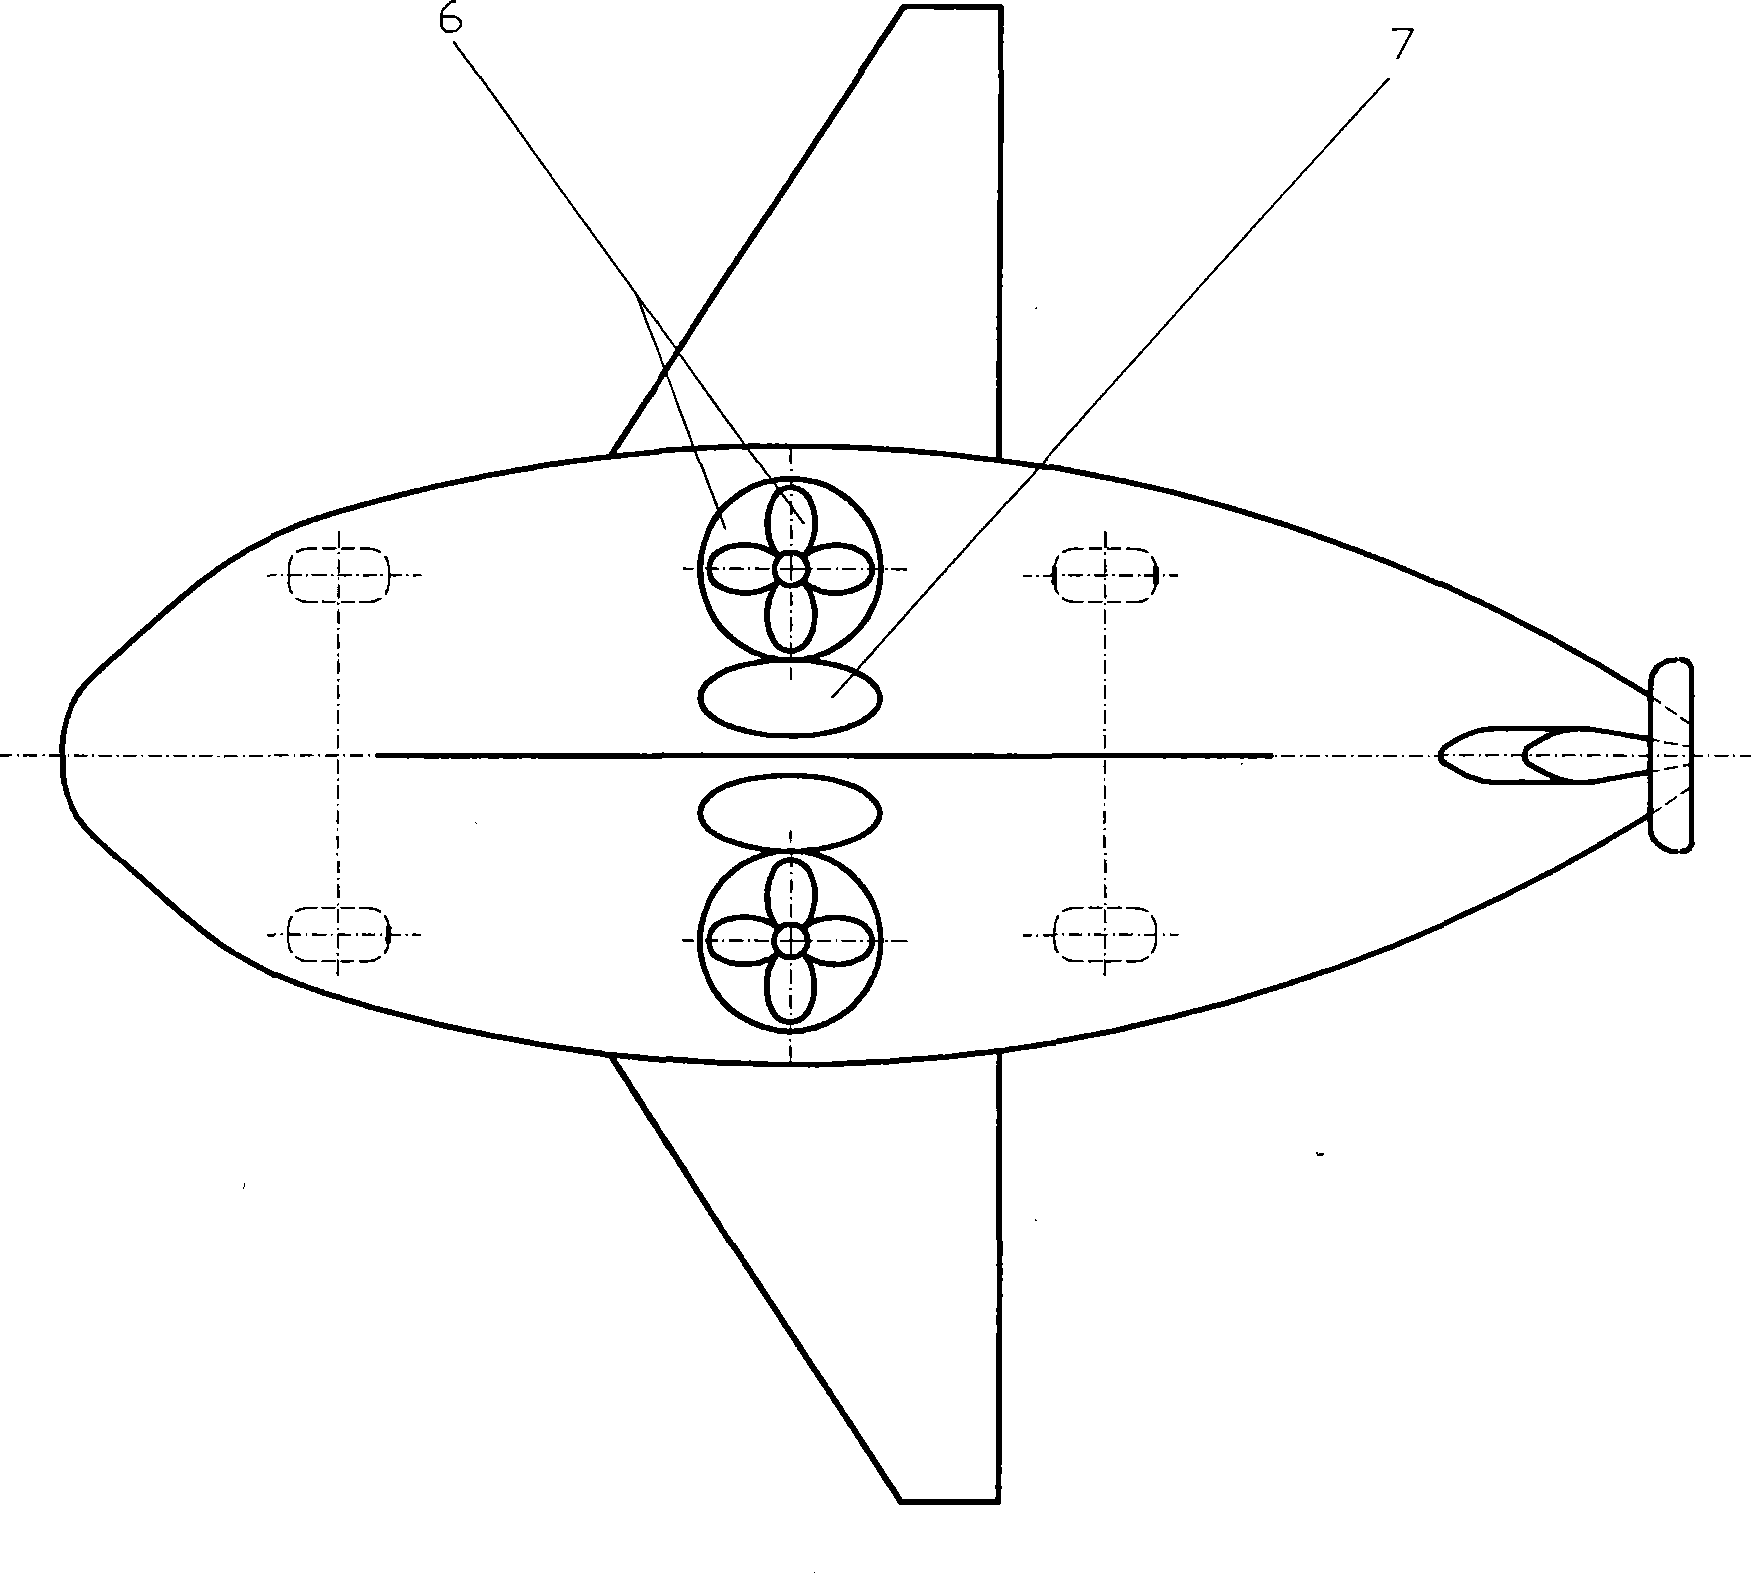 Deformable flying device